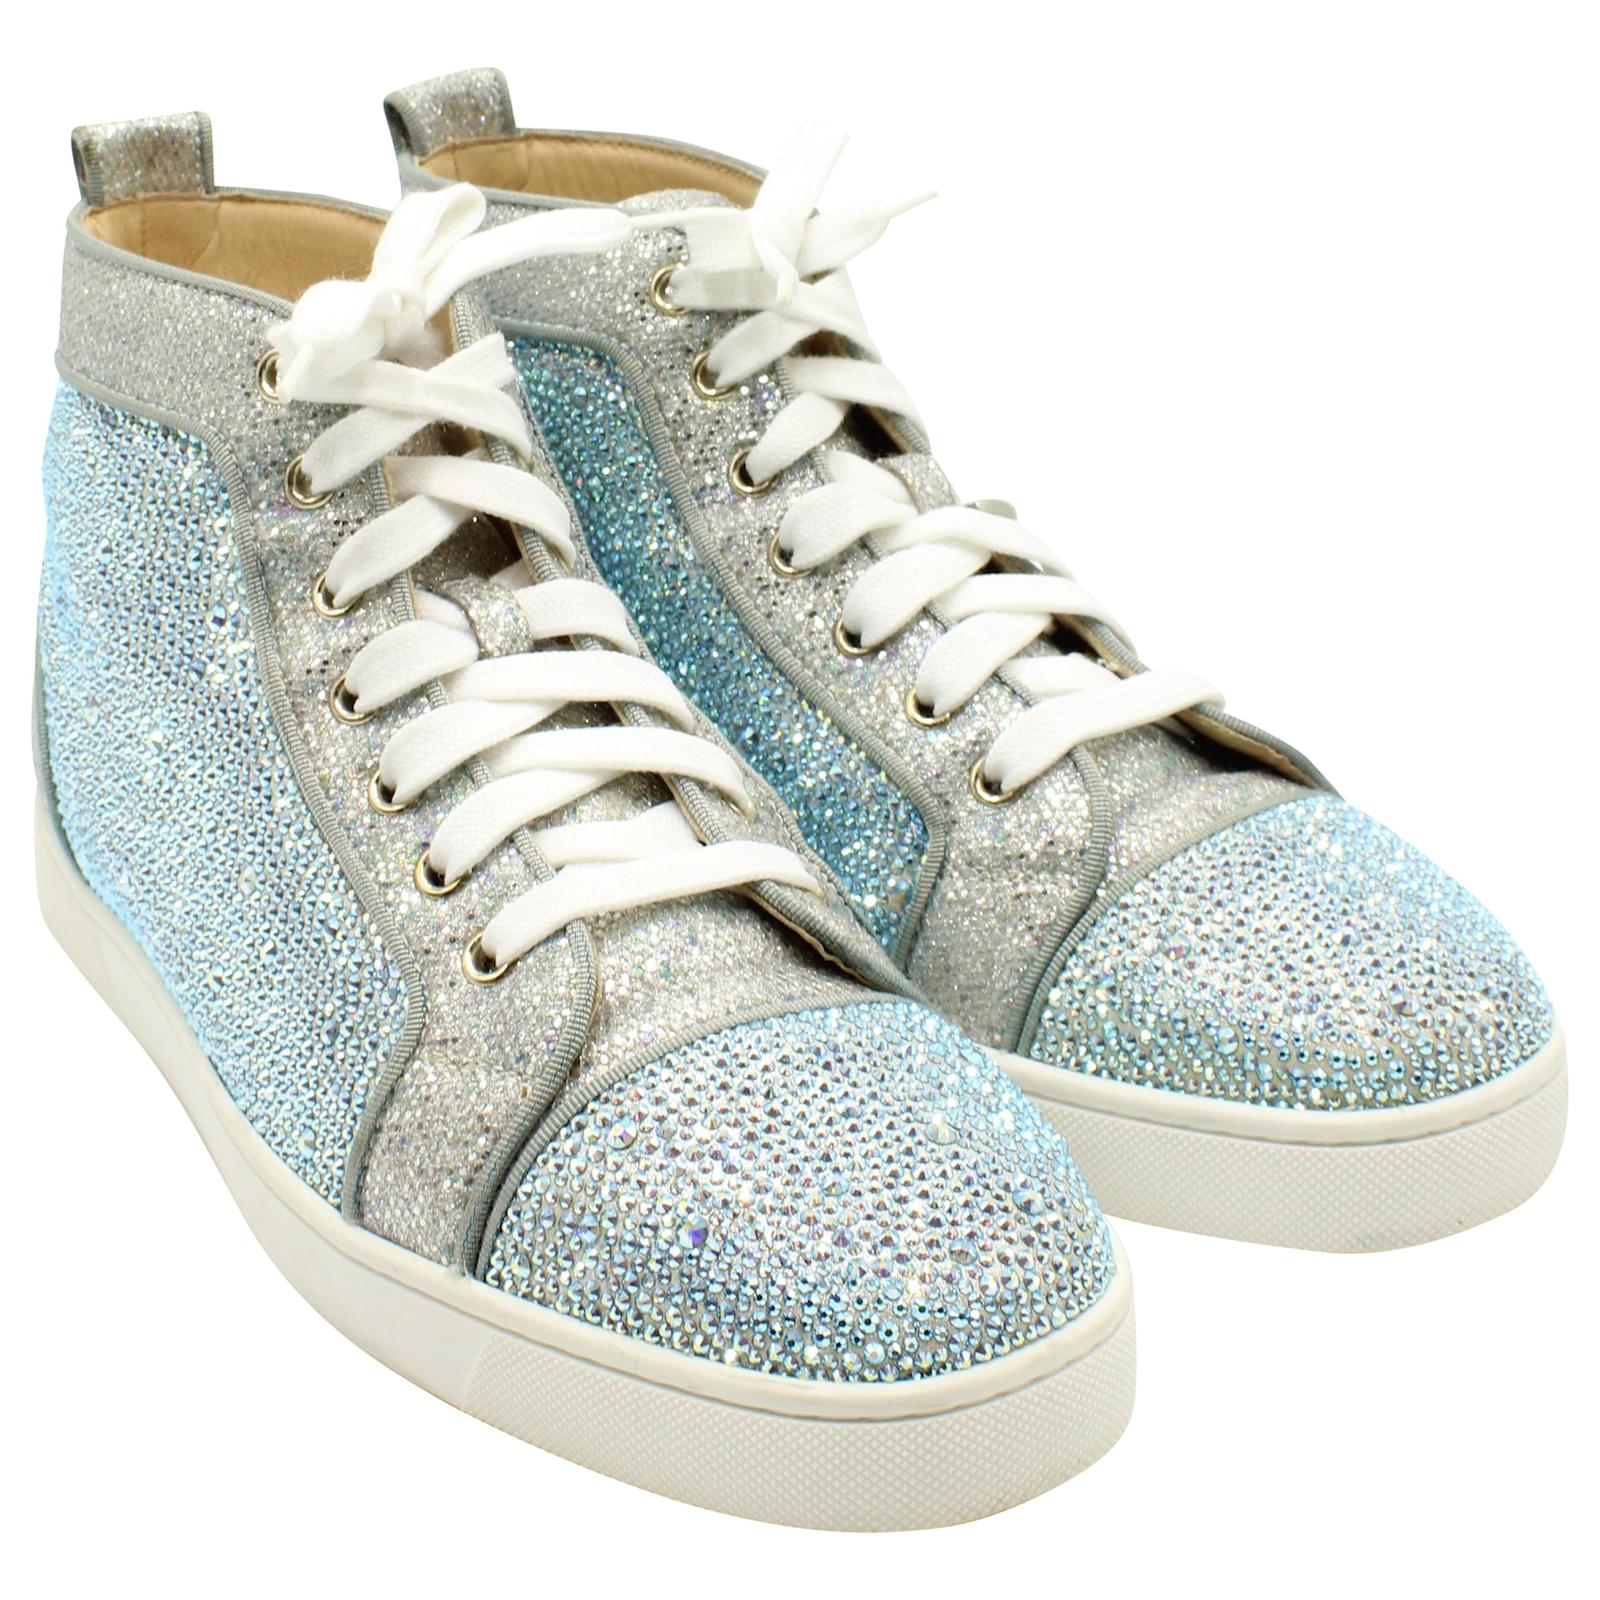 Christian Louboutin Blue Suede Louis Strass High Top Sneakers Size 37  Christian Louboutin